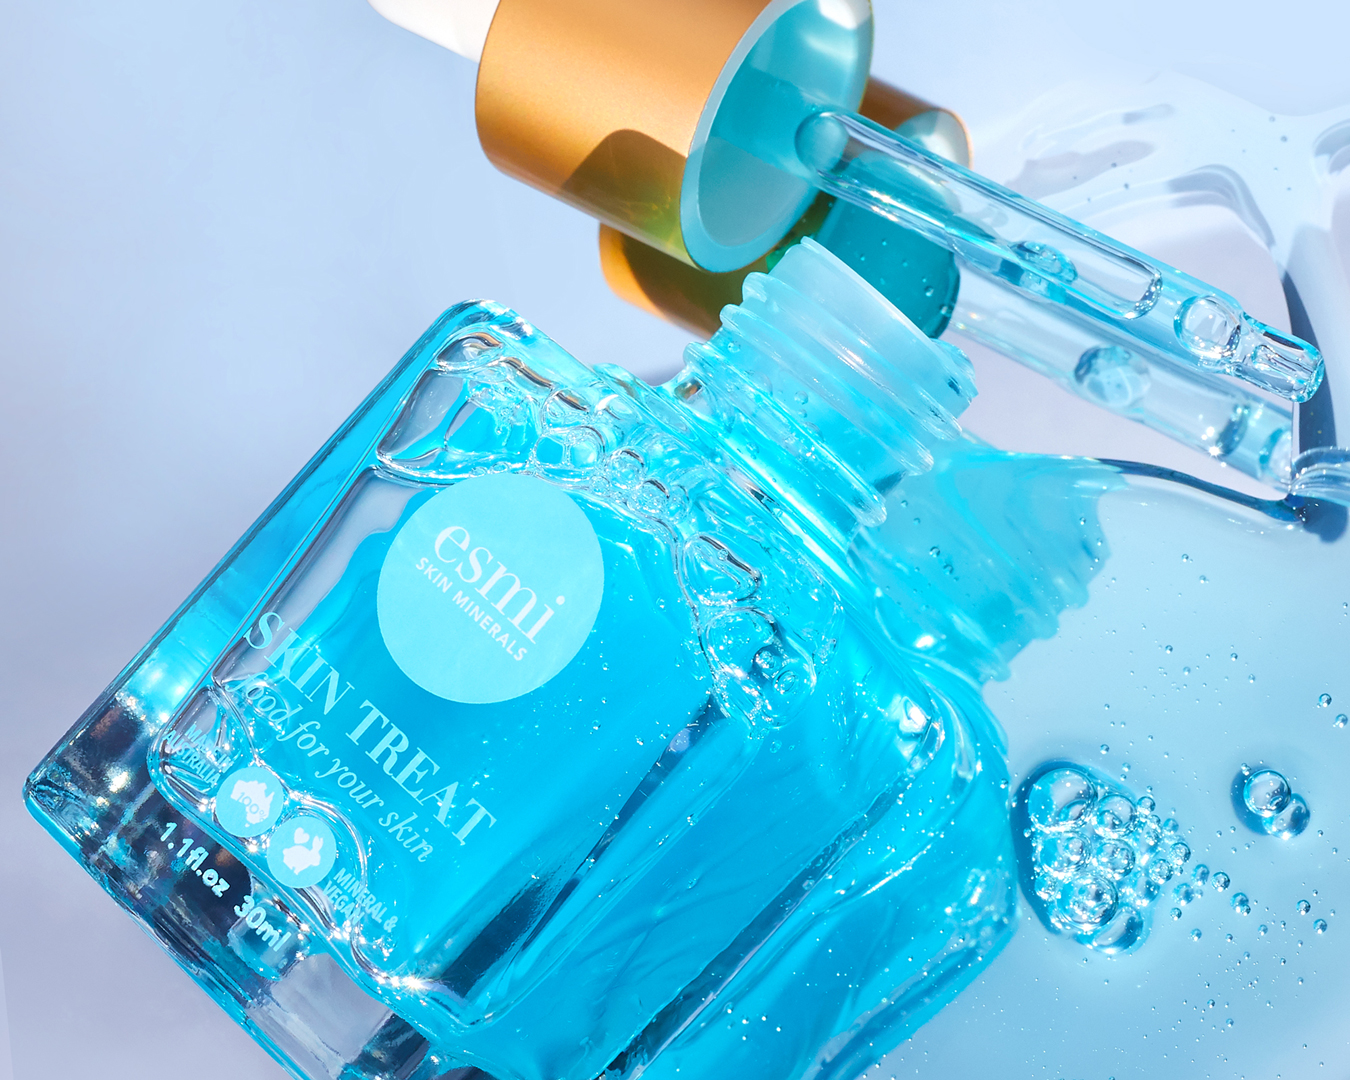 A close up of beautiful blue bottles, one of the best skincare brands available in NZ.